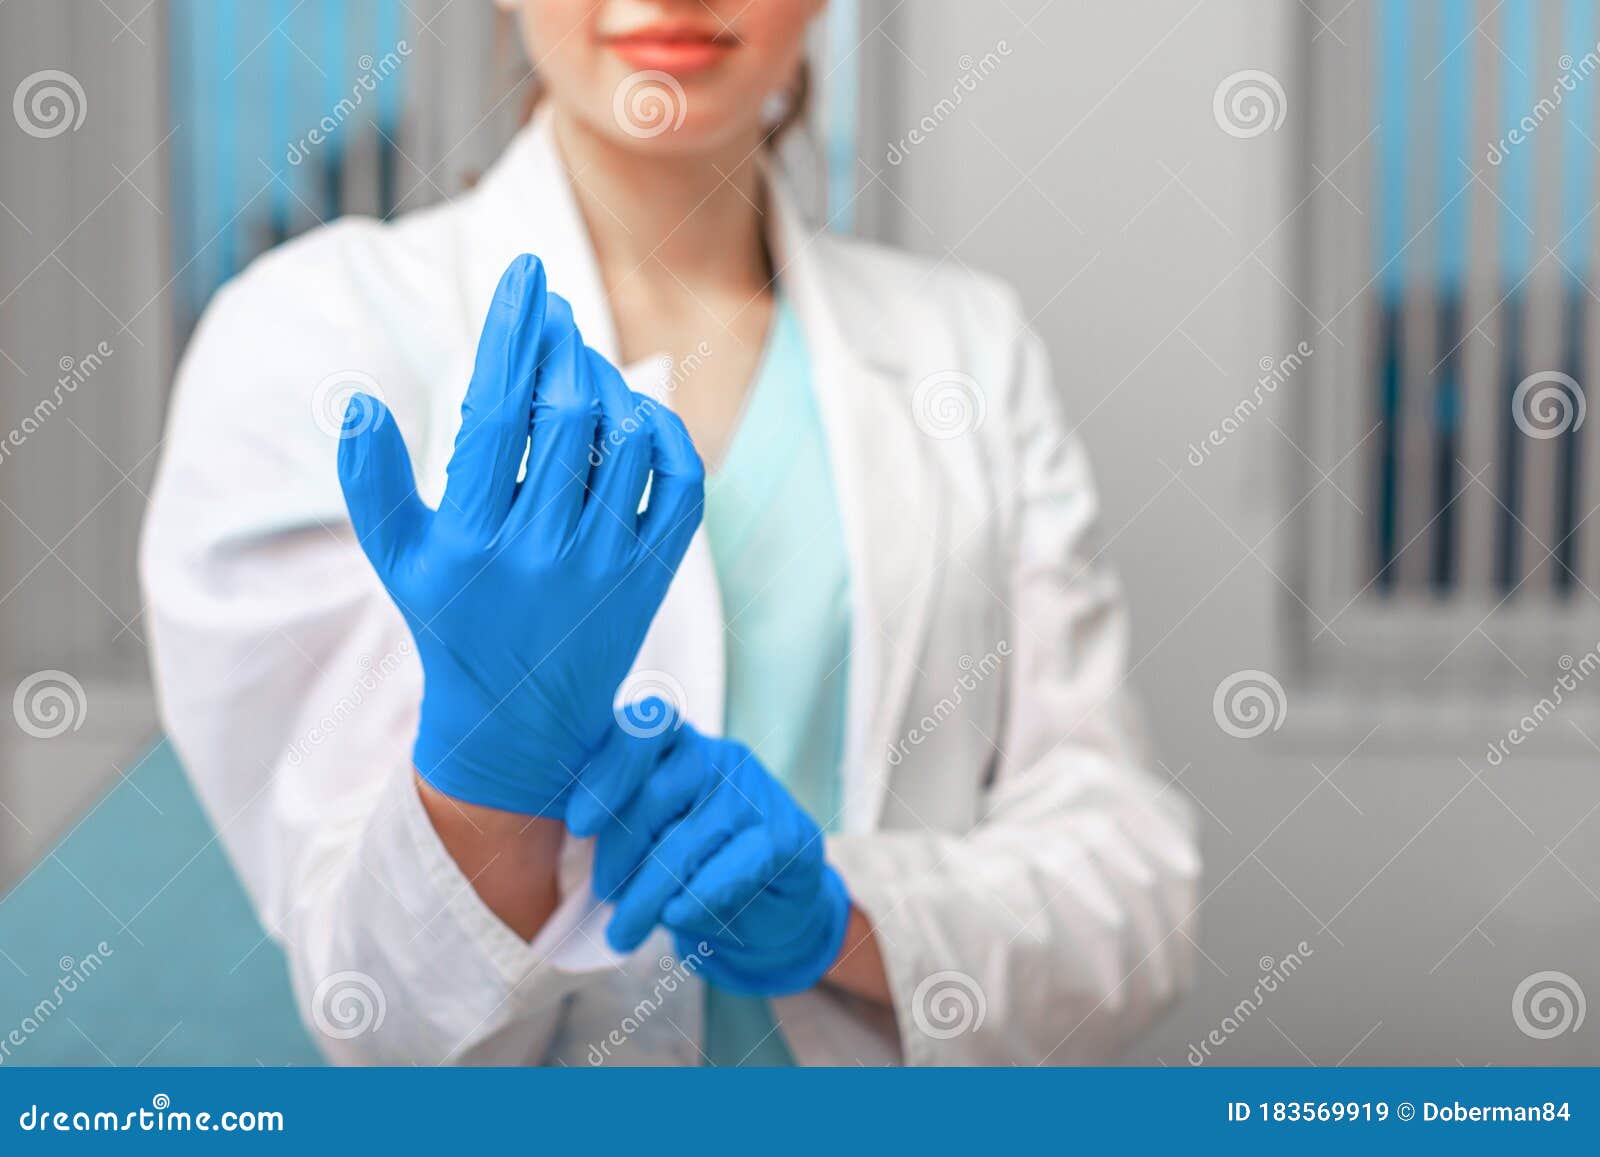 doctor`s hands putting on latex gloves in a hospital. woman in a doctor`s smock in latex gloves. protection against